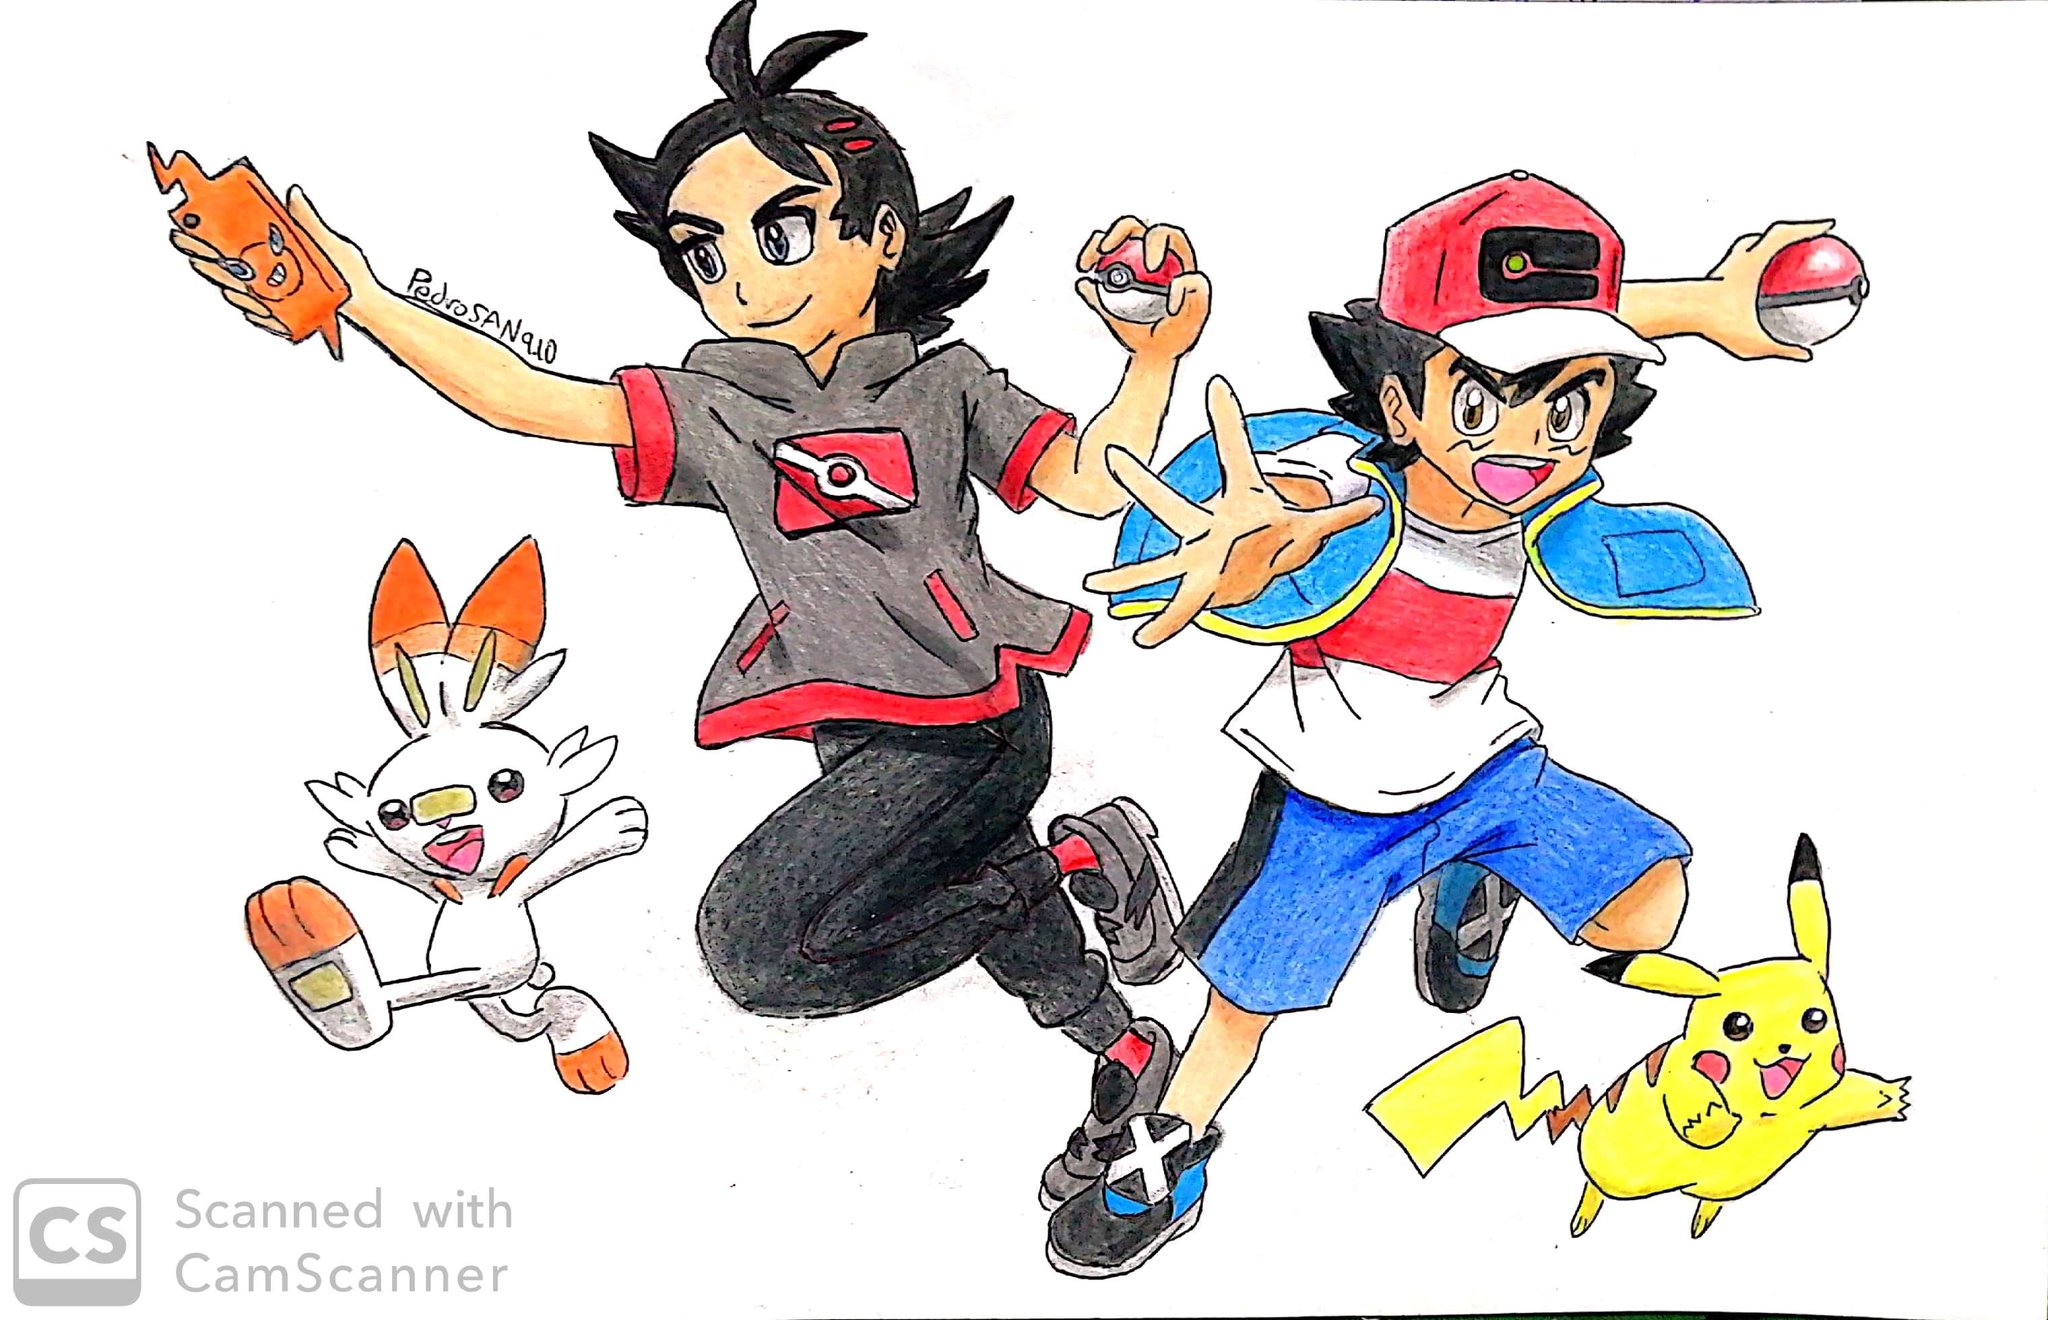 How to draw Ash and Pikachu | Pokémon | Pikachu and Ash step by step -  YouTube | Pikachu drawing, Pokemon drawings, Easy drawings